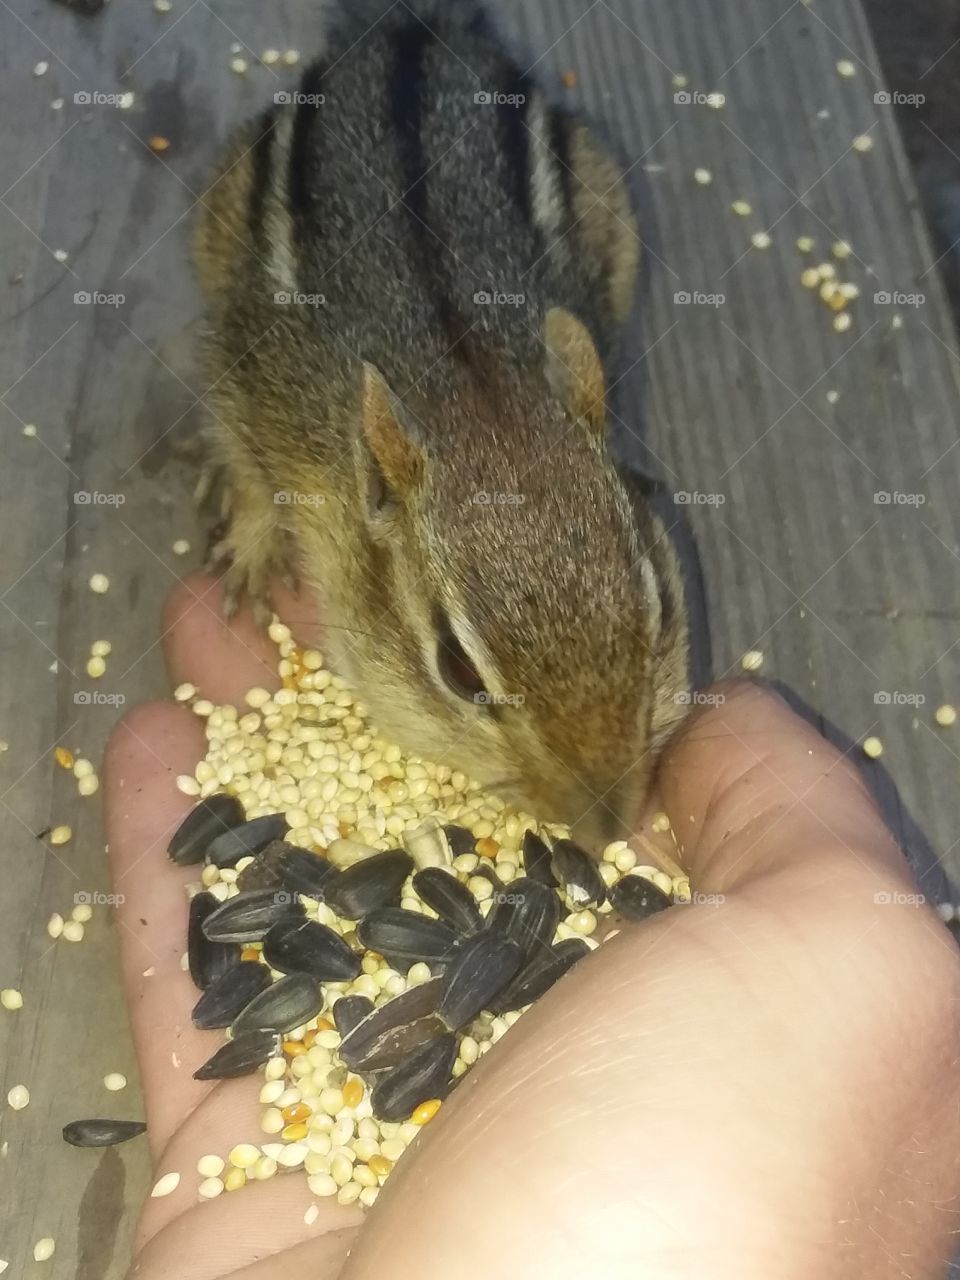 chipmunk eating from my hand